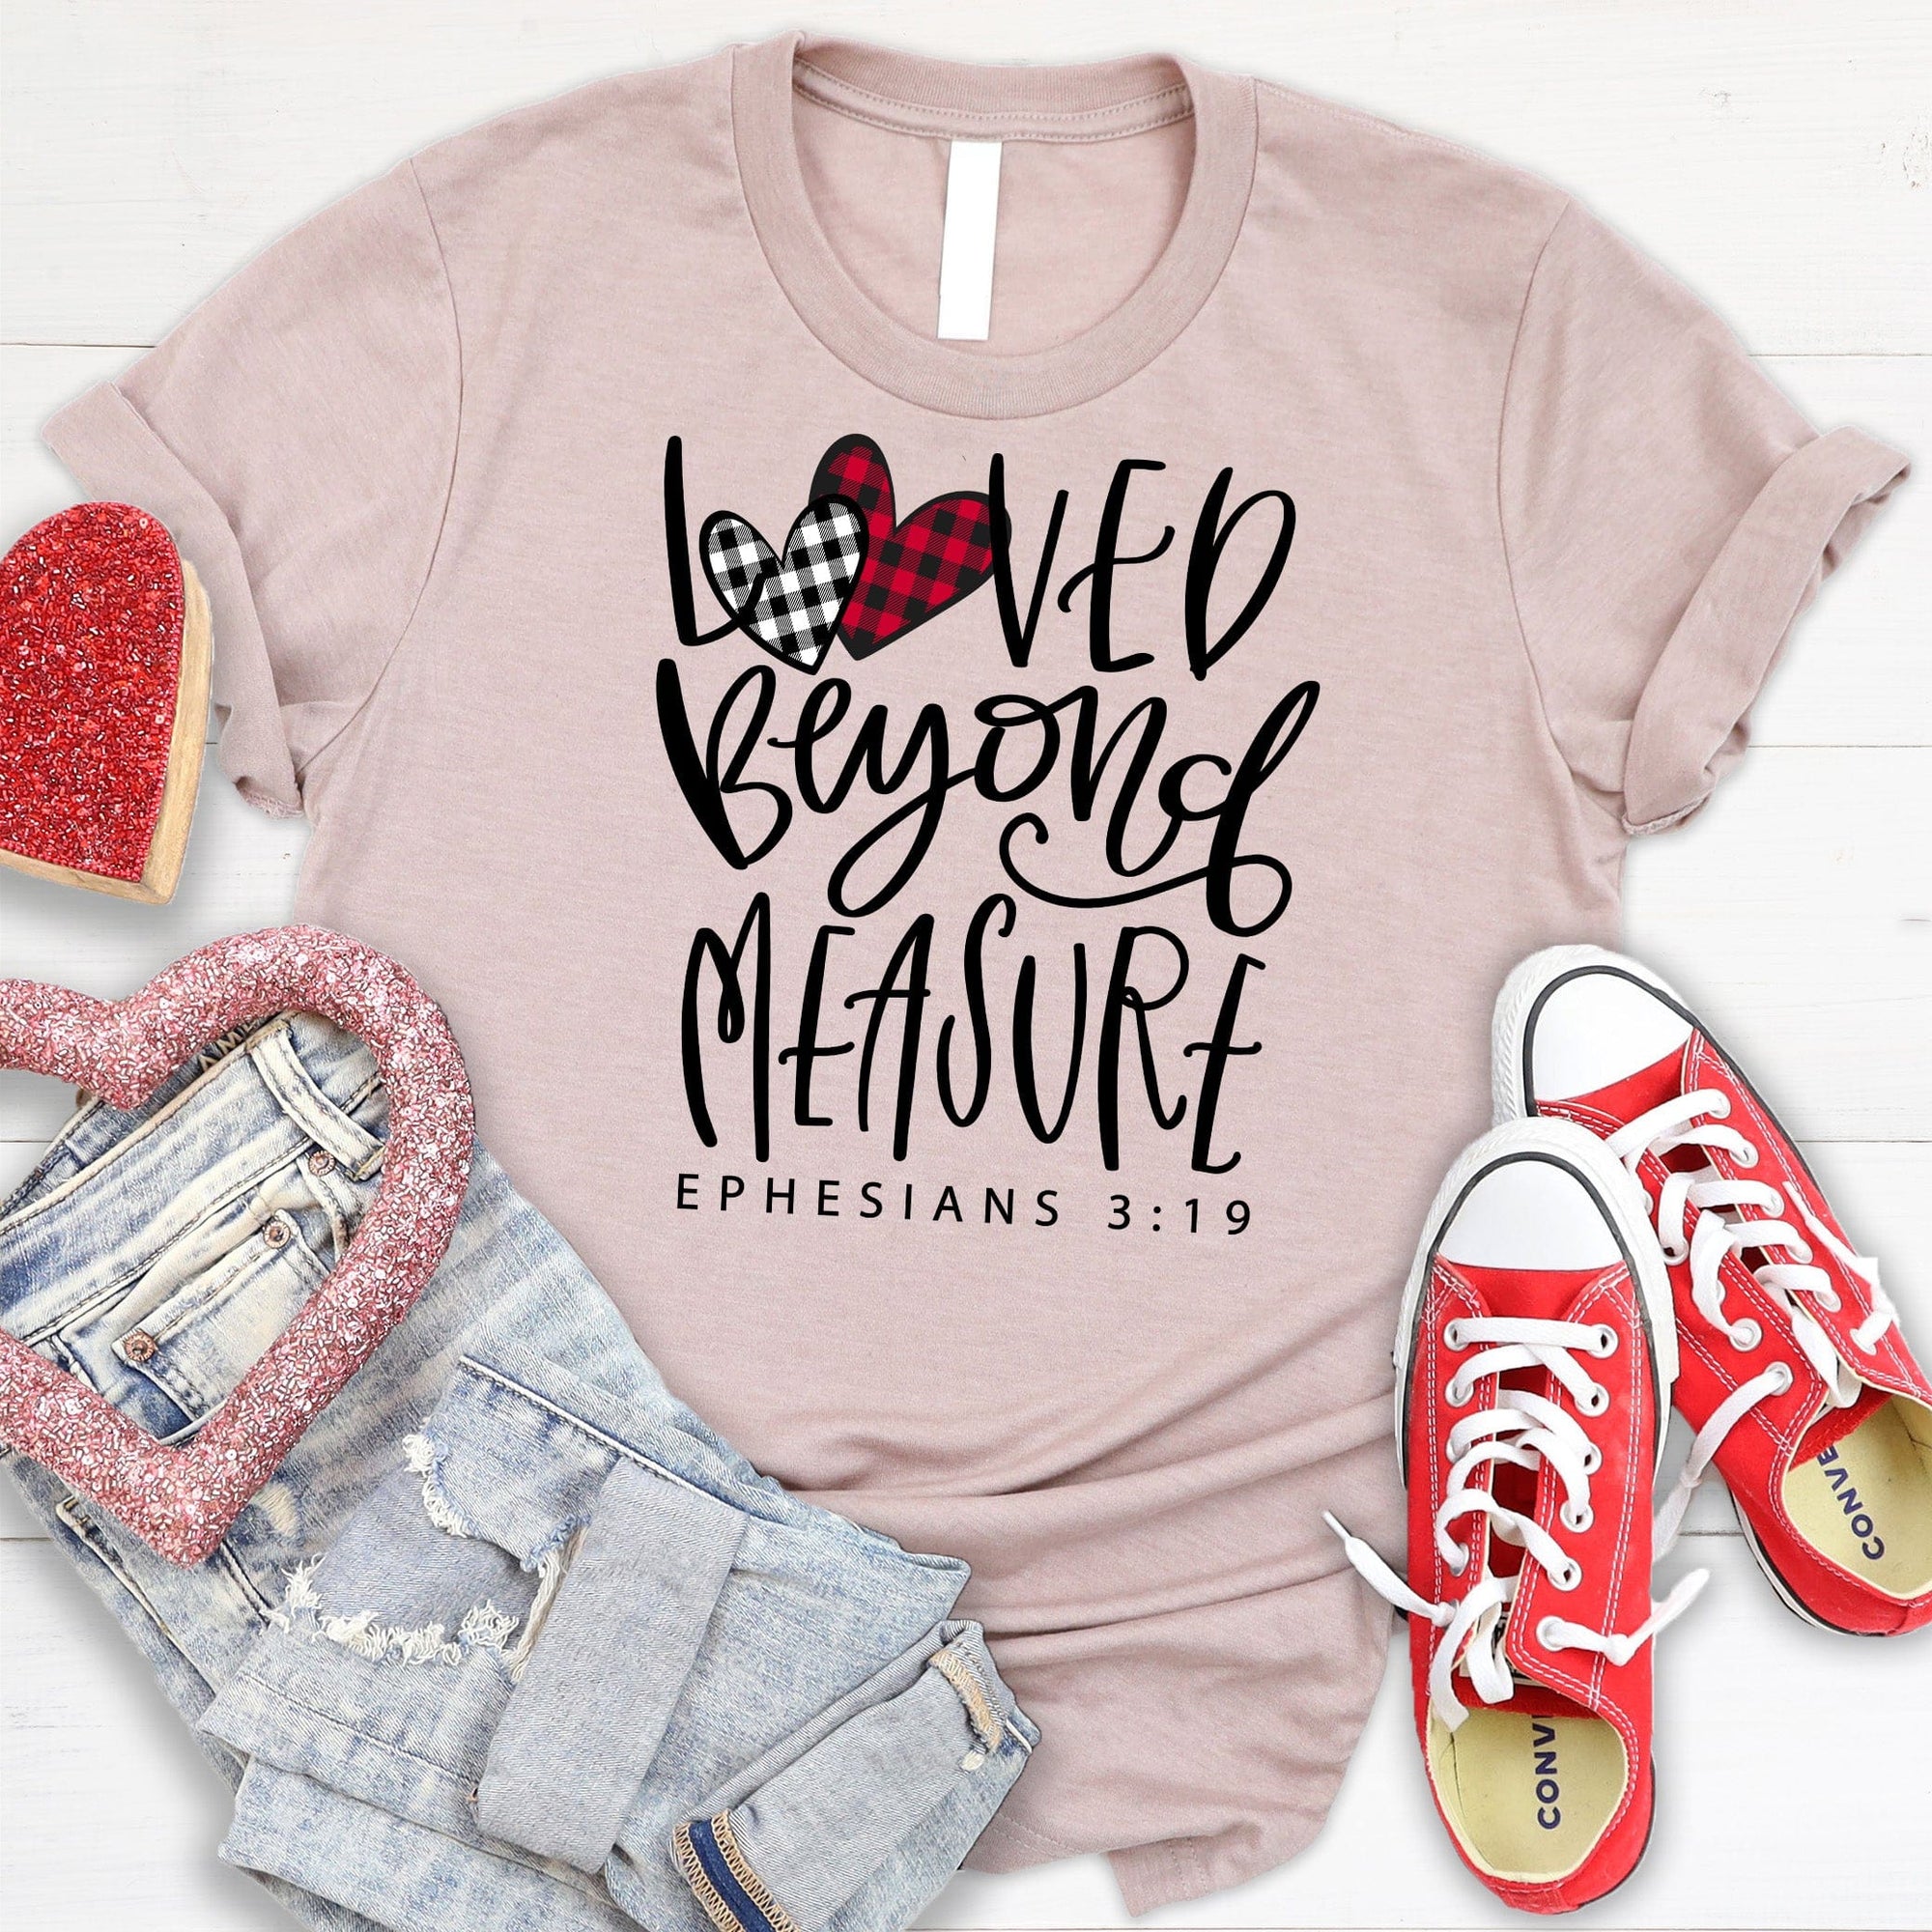 Loved Beyond All Measure T Shirts For Women - Women's Christian T Shirts - Women's Religious Shirts